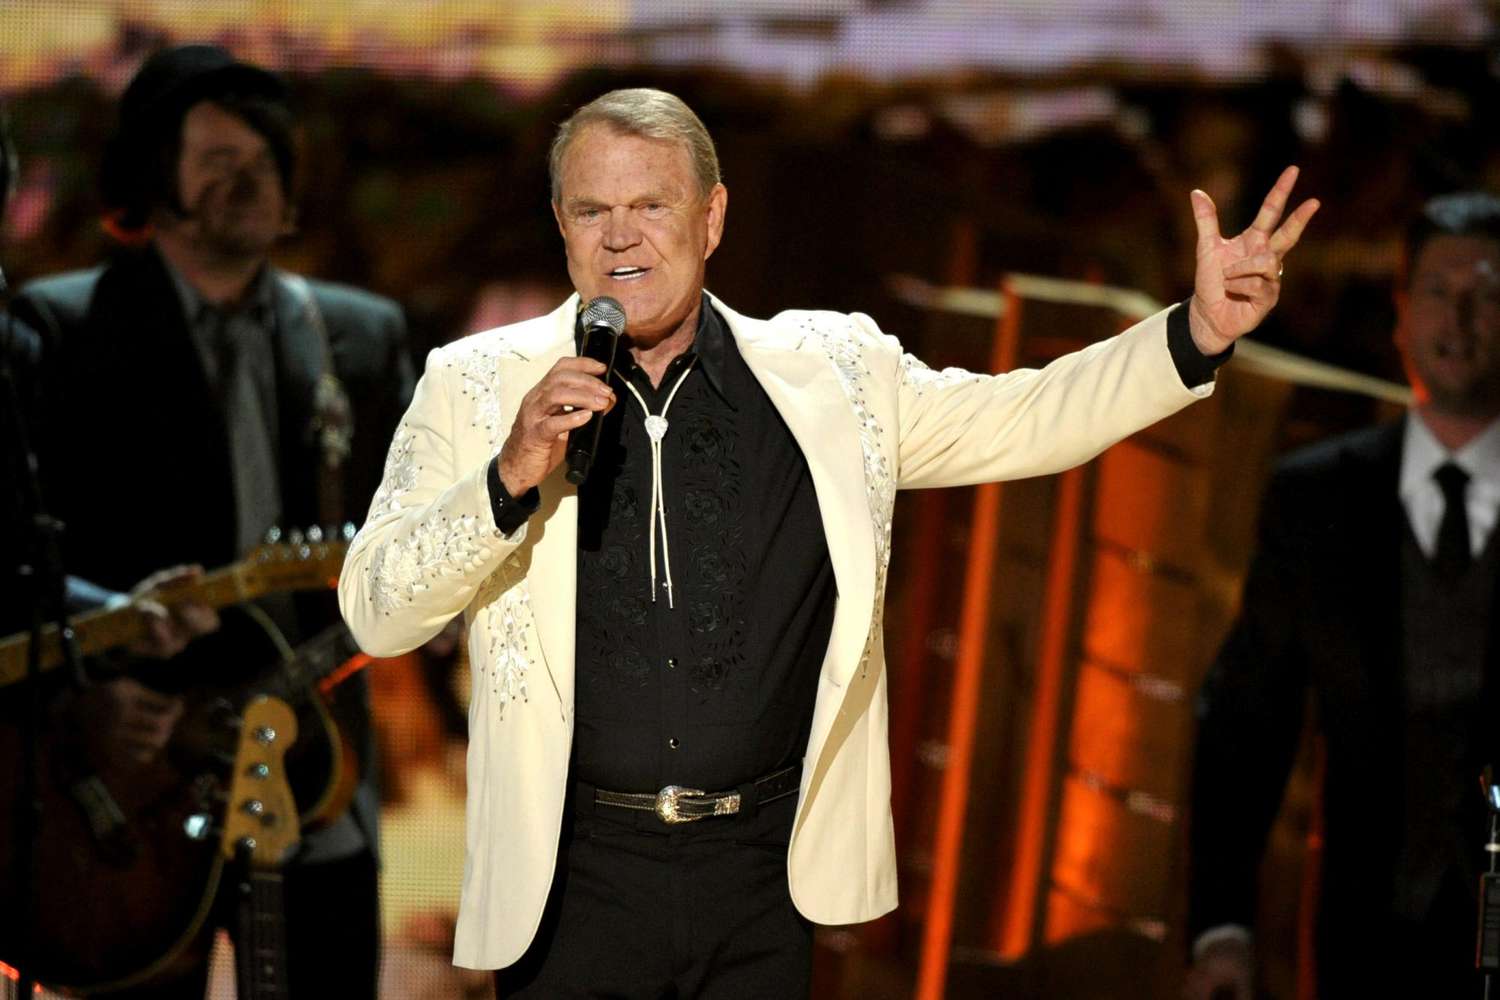 Glen Campbell on stage at The 54th Grammy Awards at Staples Center on Feb. 12, 2012 in Los Angeles